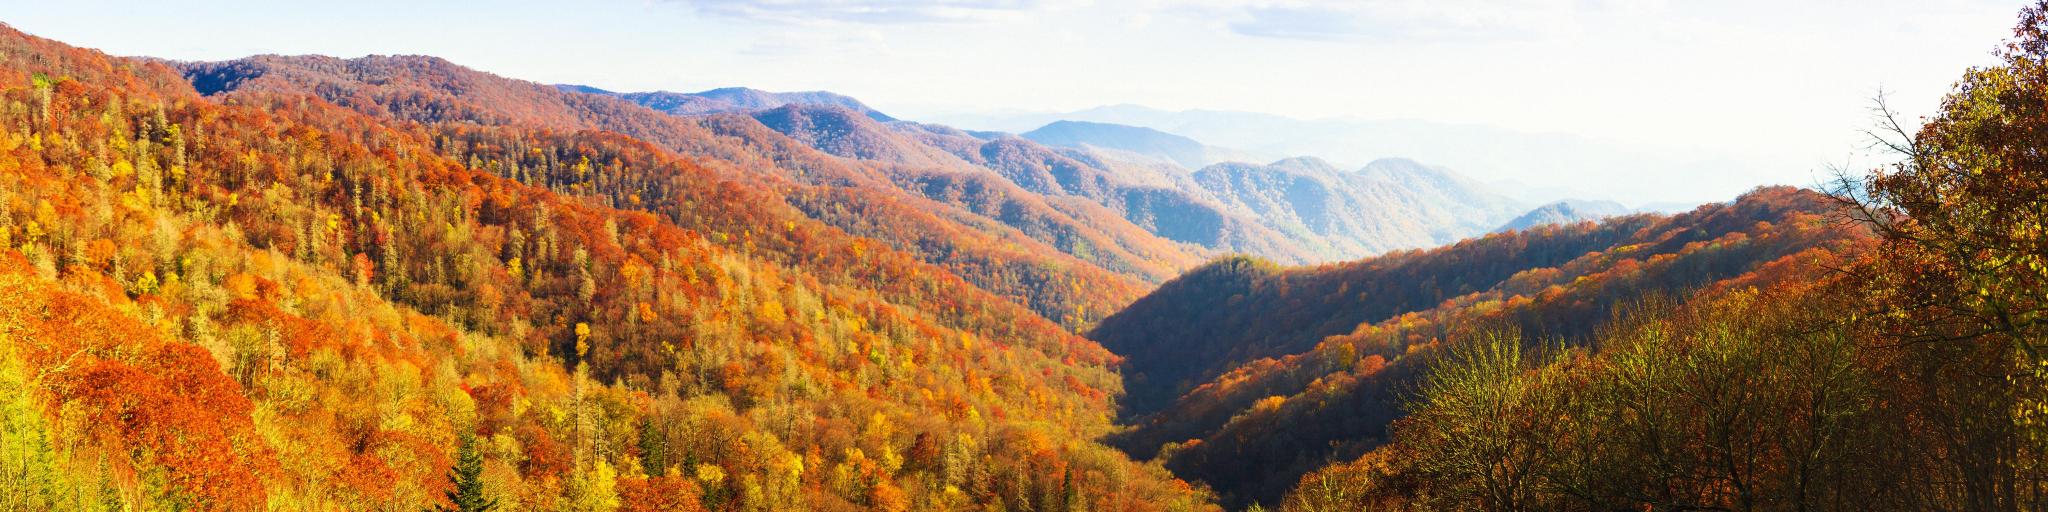 Panoramic view of the Great Smoky Mountains National Park in Tennessee